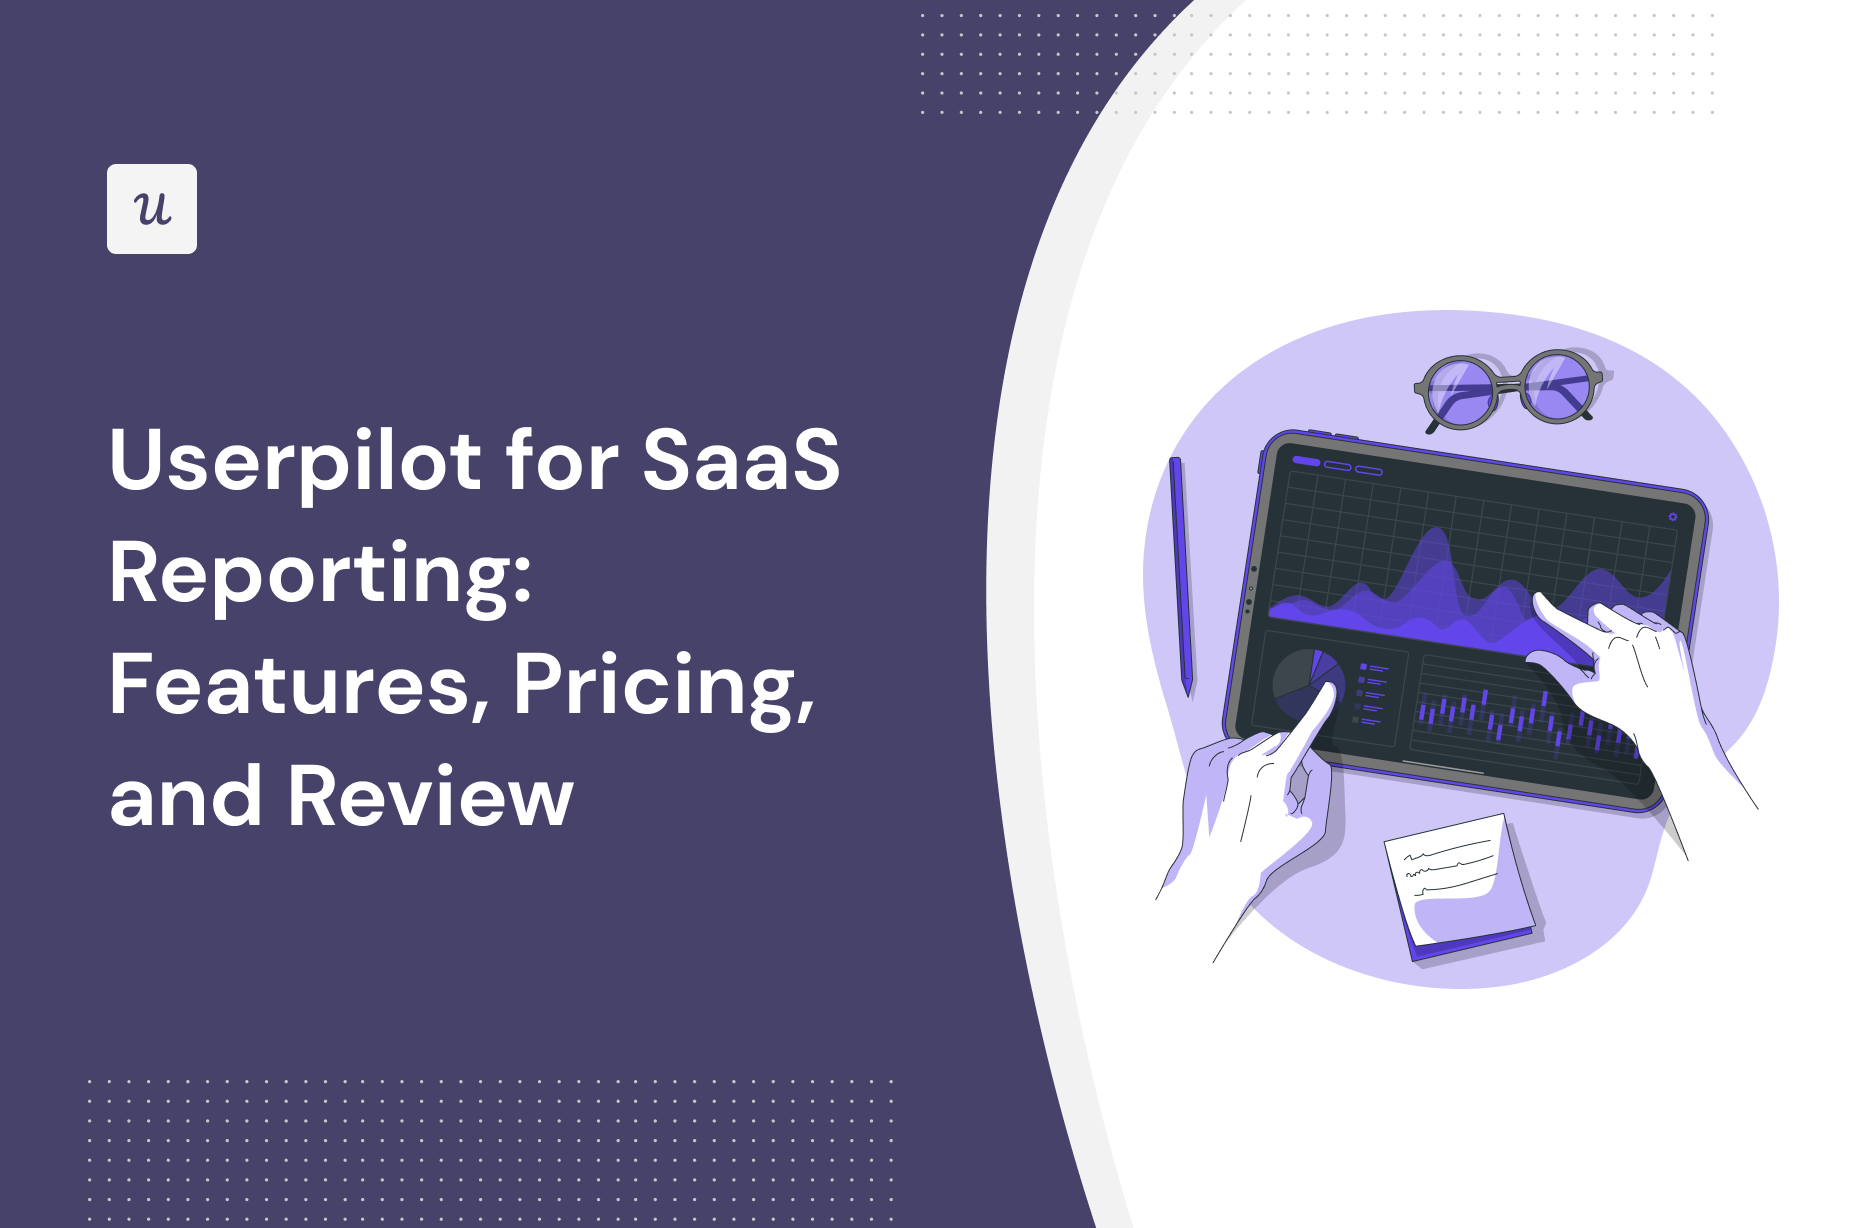 Userpilot for SaaS Reporting: Features, Pricing, and Review